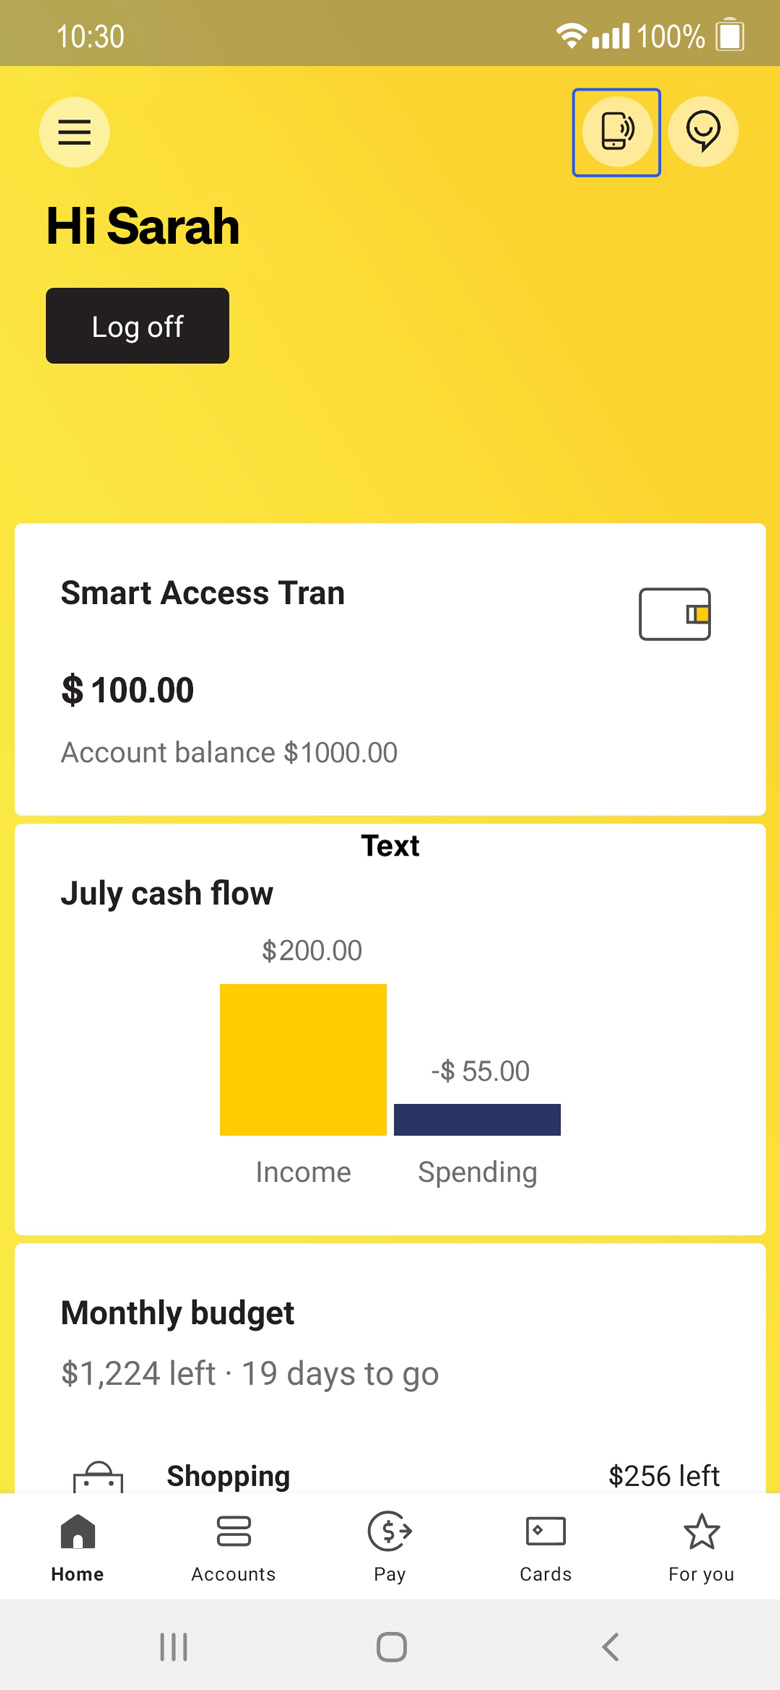 CommBank app home screen, showing the tap icon at the top right